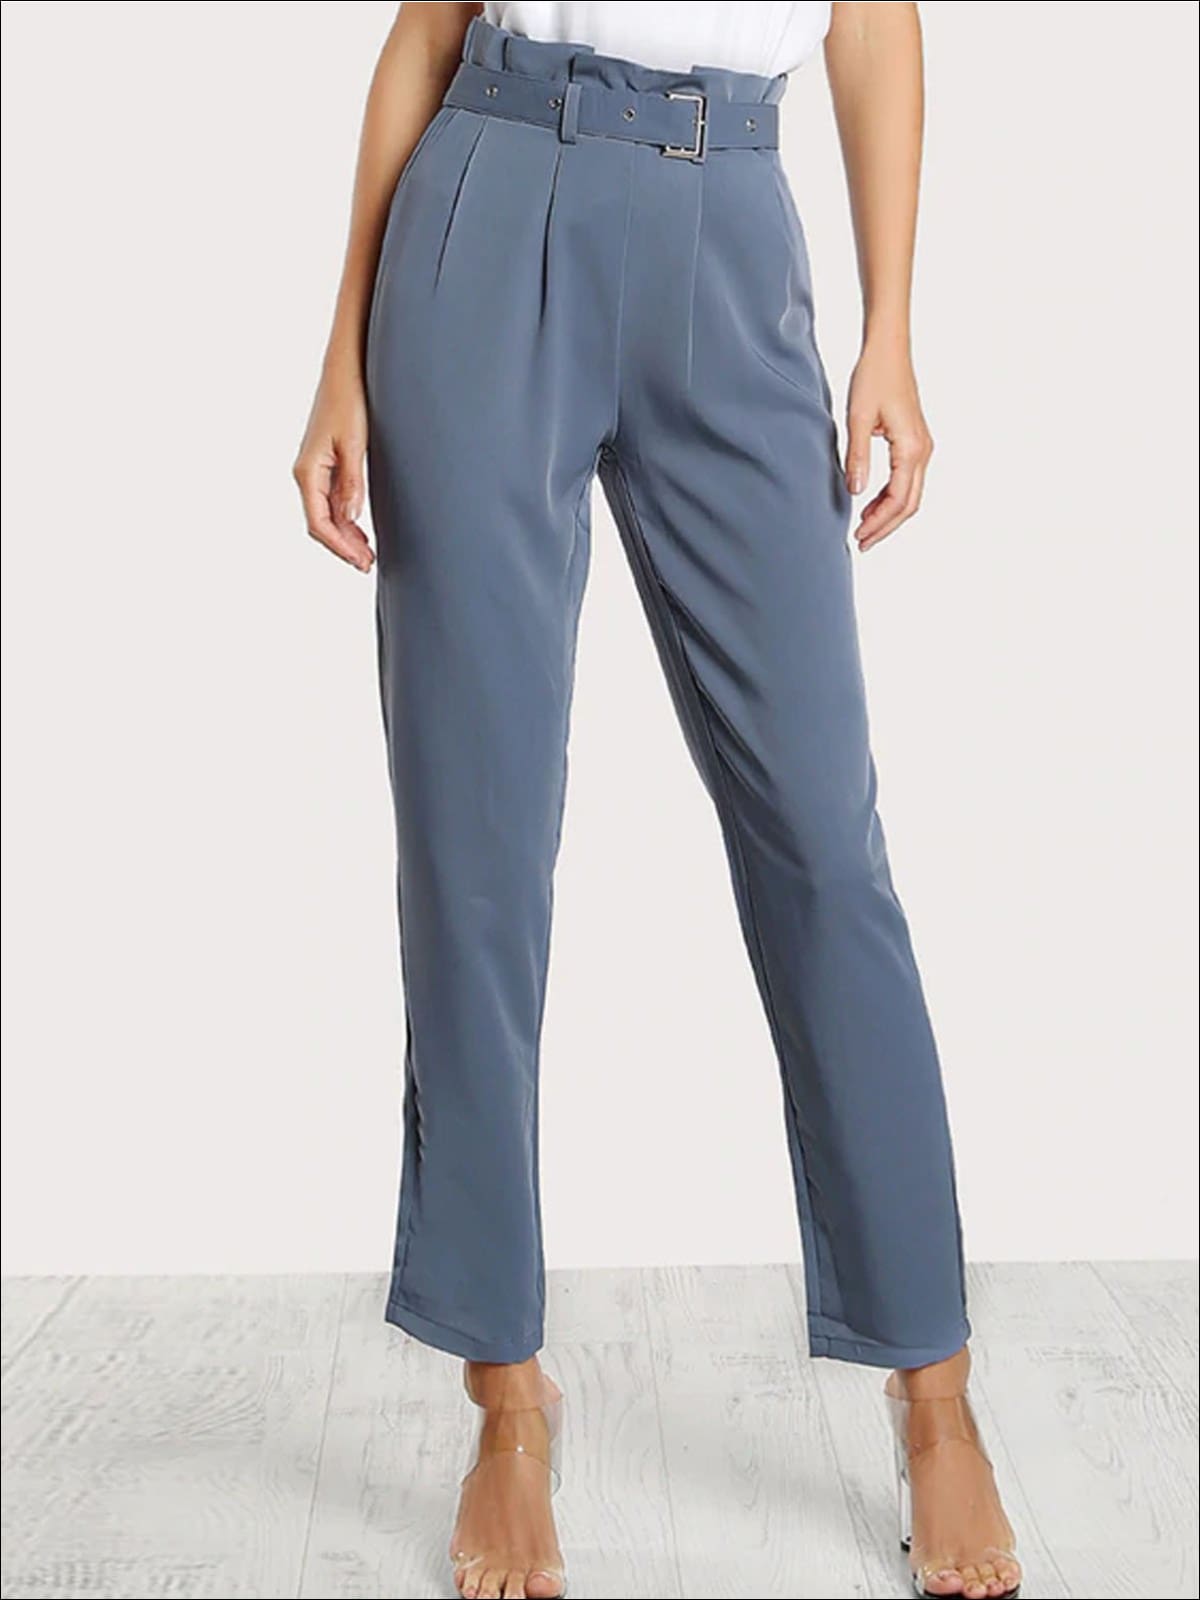 Women's Pleated Tailored Pants With Buckle Belt